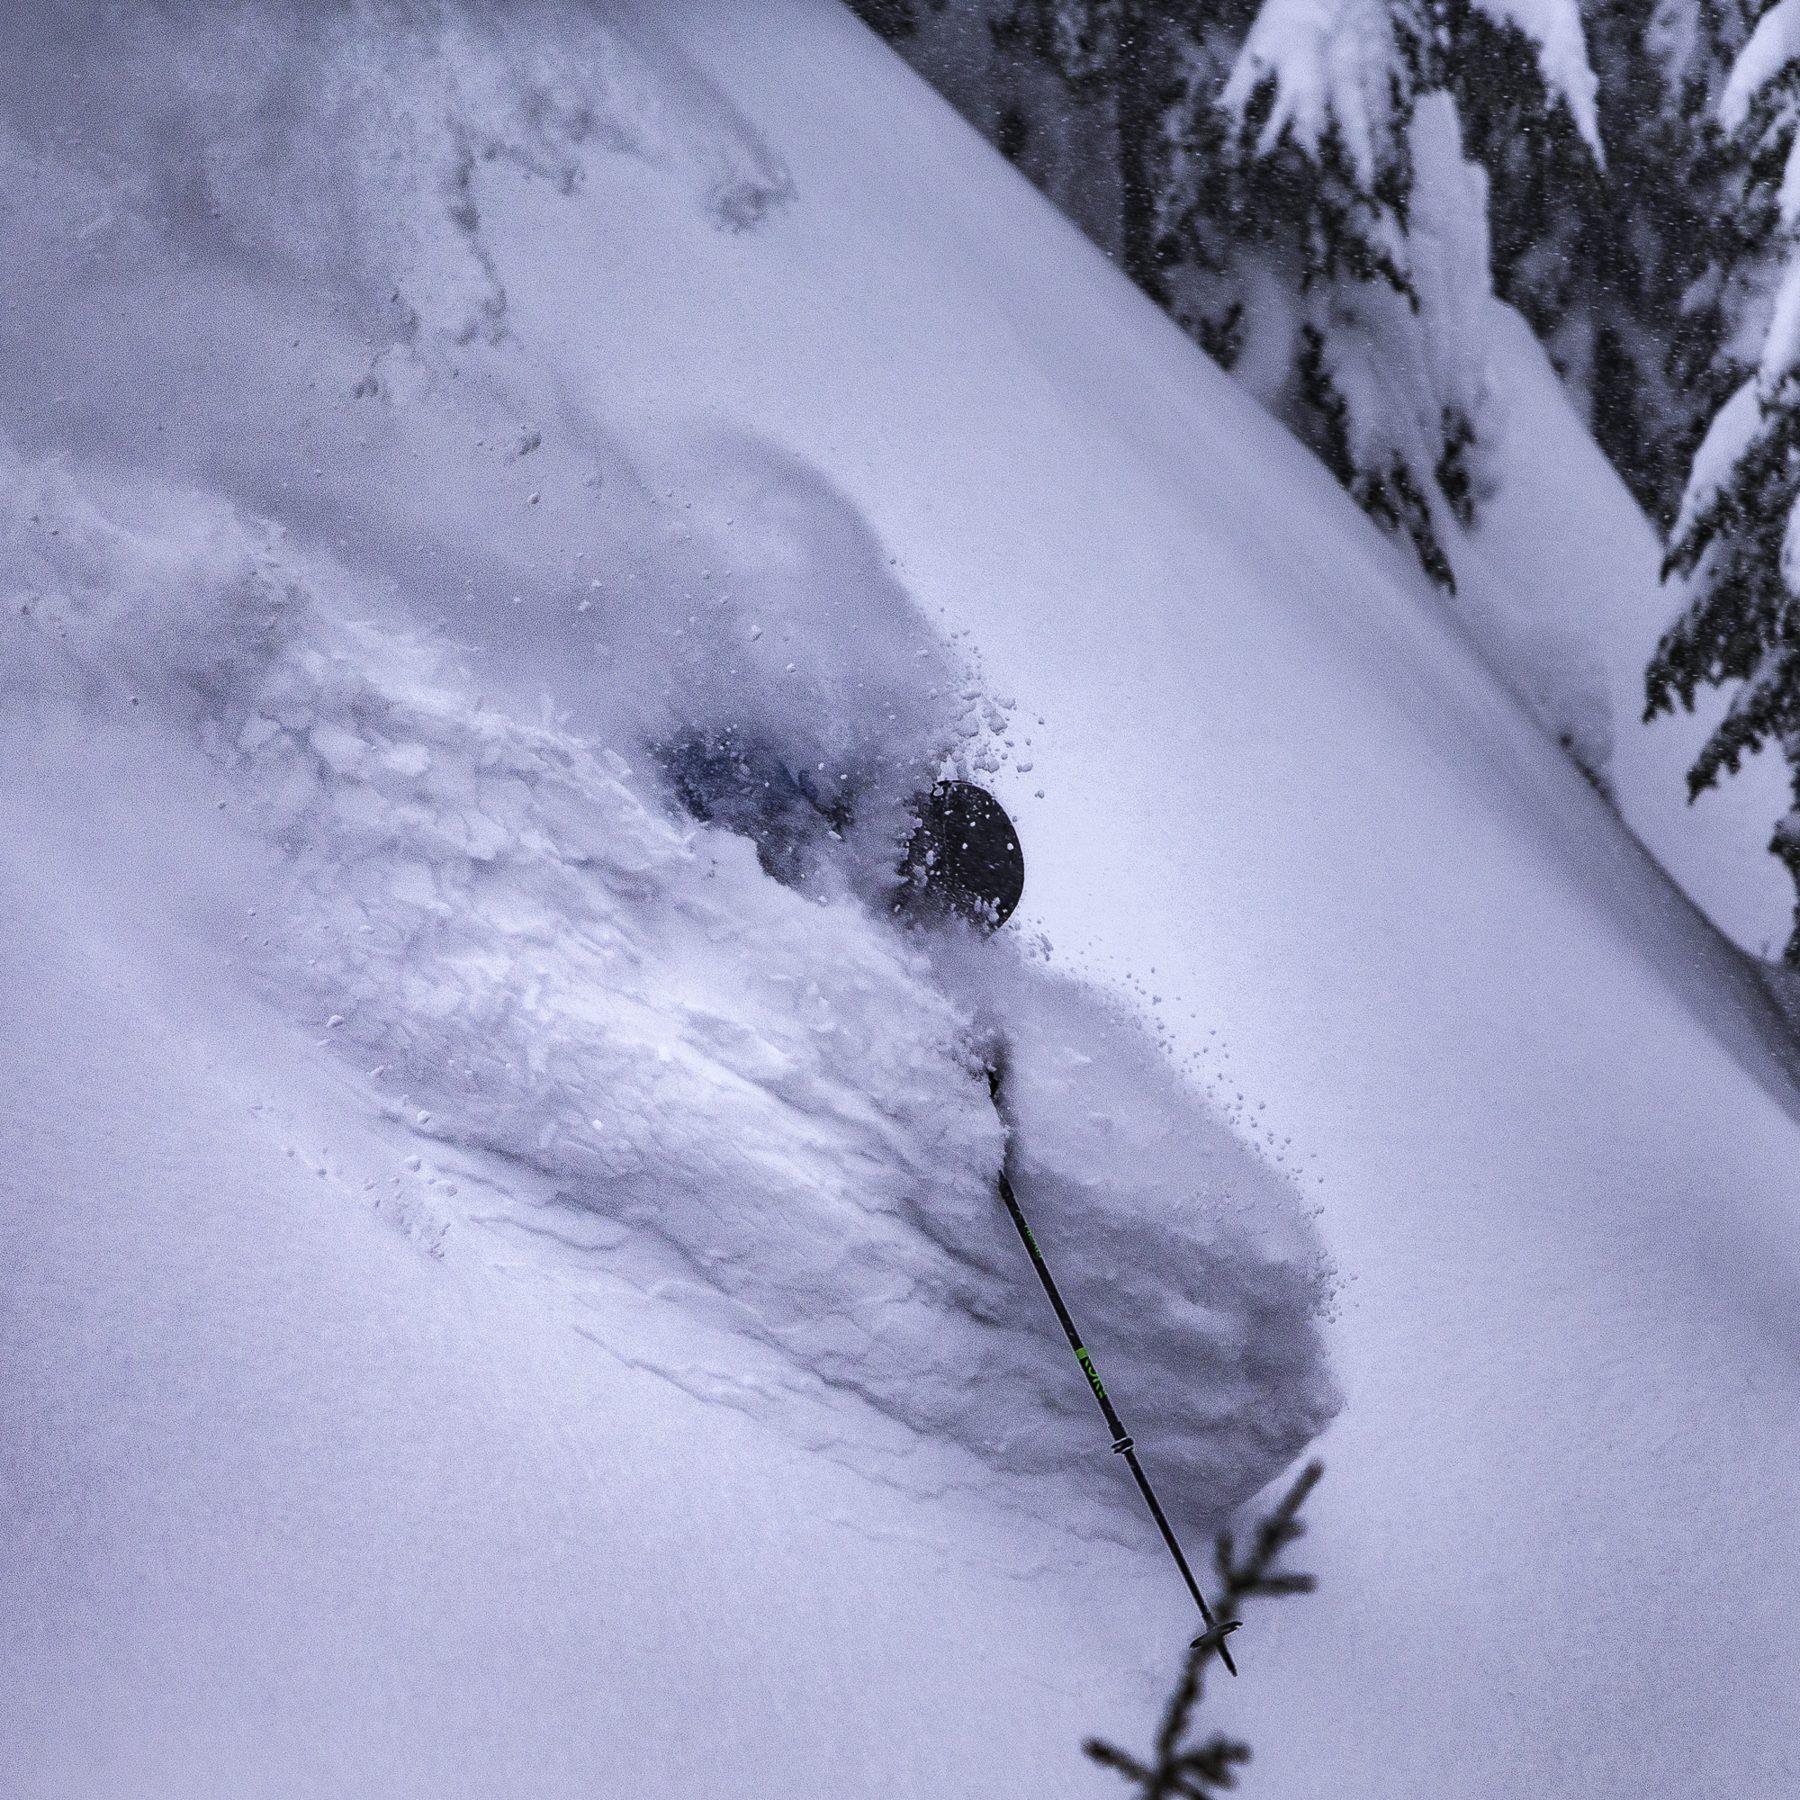 Skier enjoys deep powder after long storm cycle in Whistler Blackcomb. Photo Paul Morrison. Whistler Blackcomb. Vail Resorts. New investments in Whistler Blackcomb to enhance the guest experience will be ready for the 2018-19 ski season.